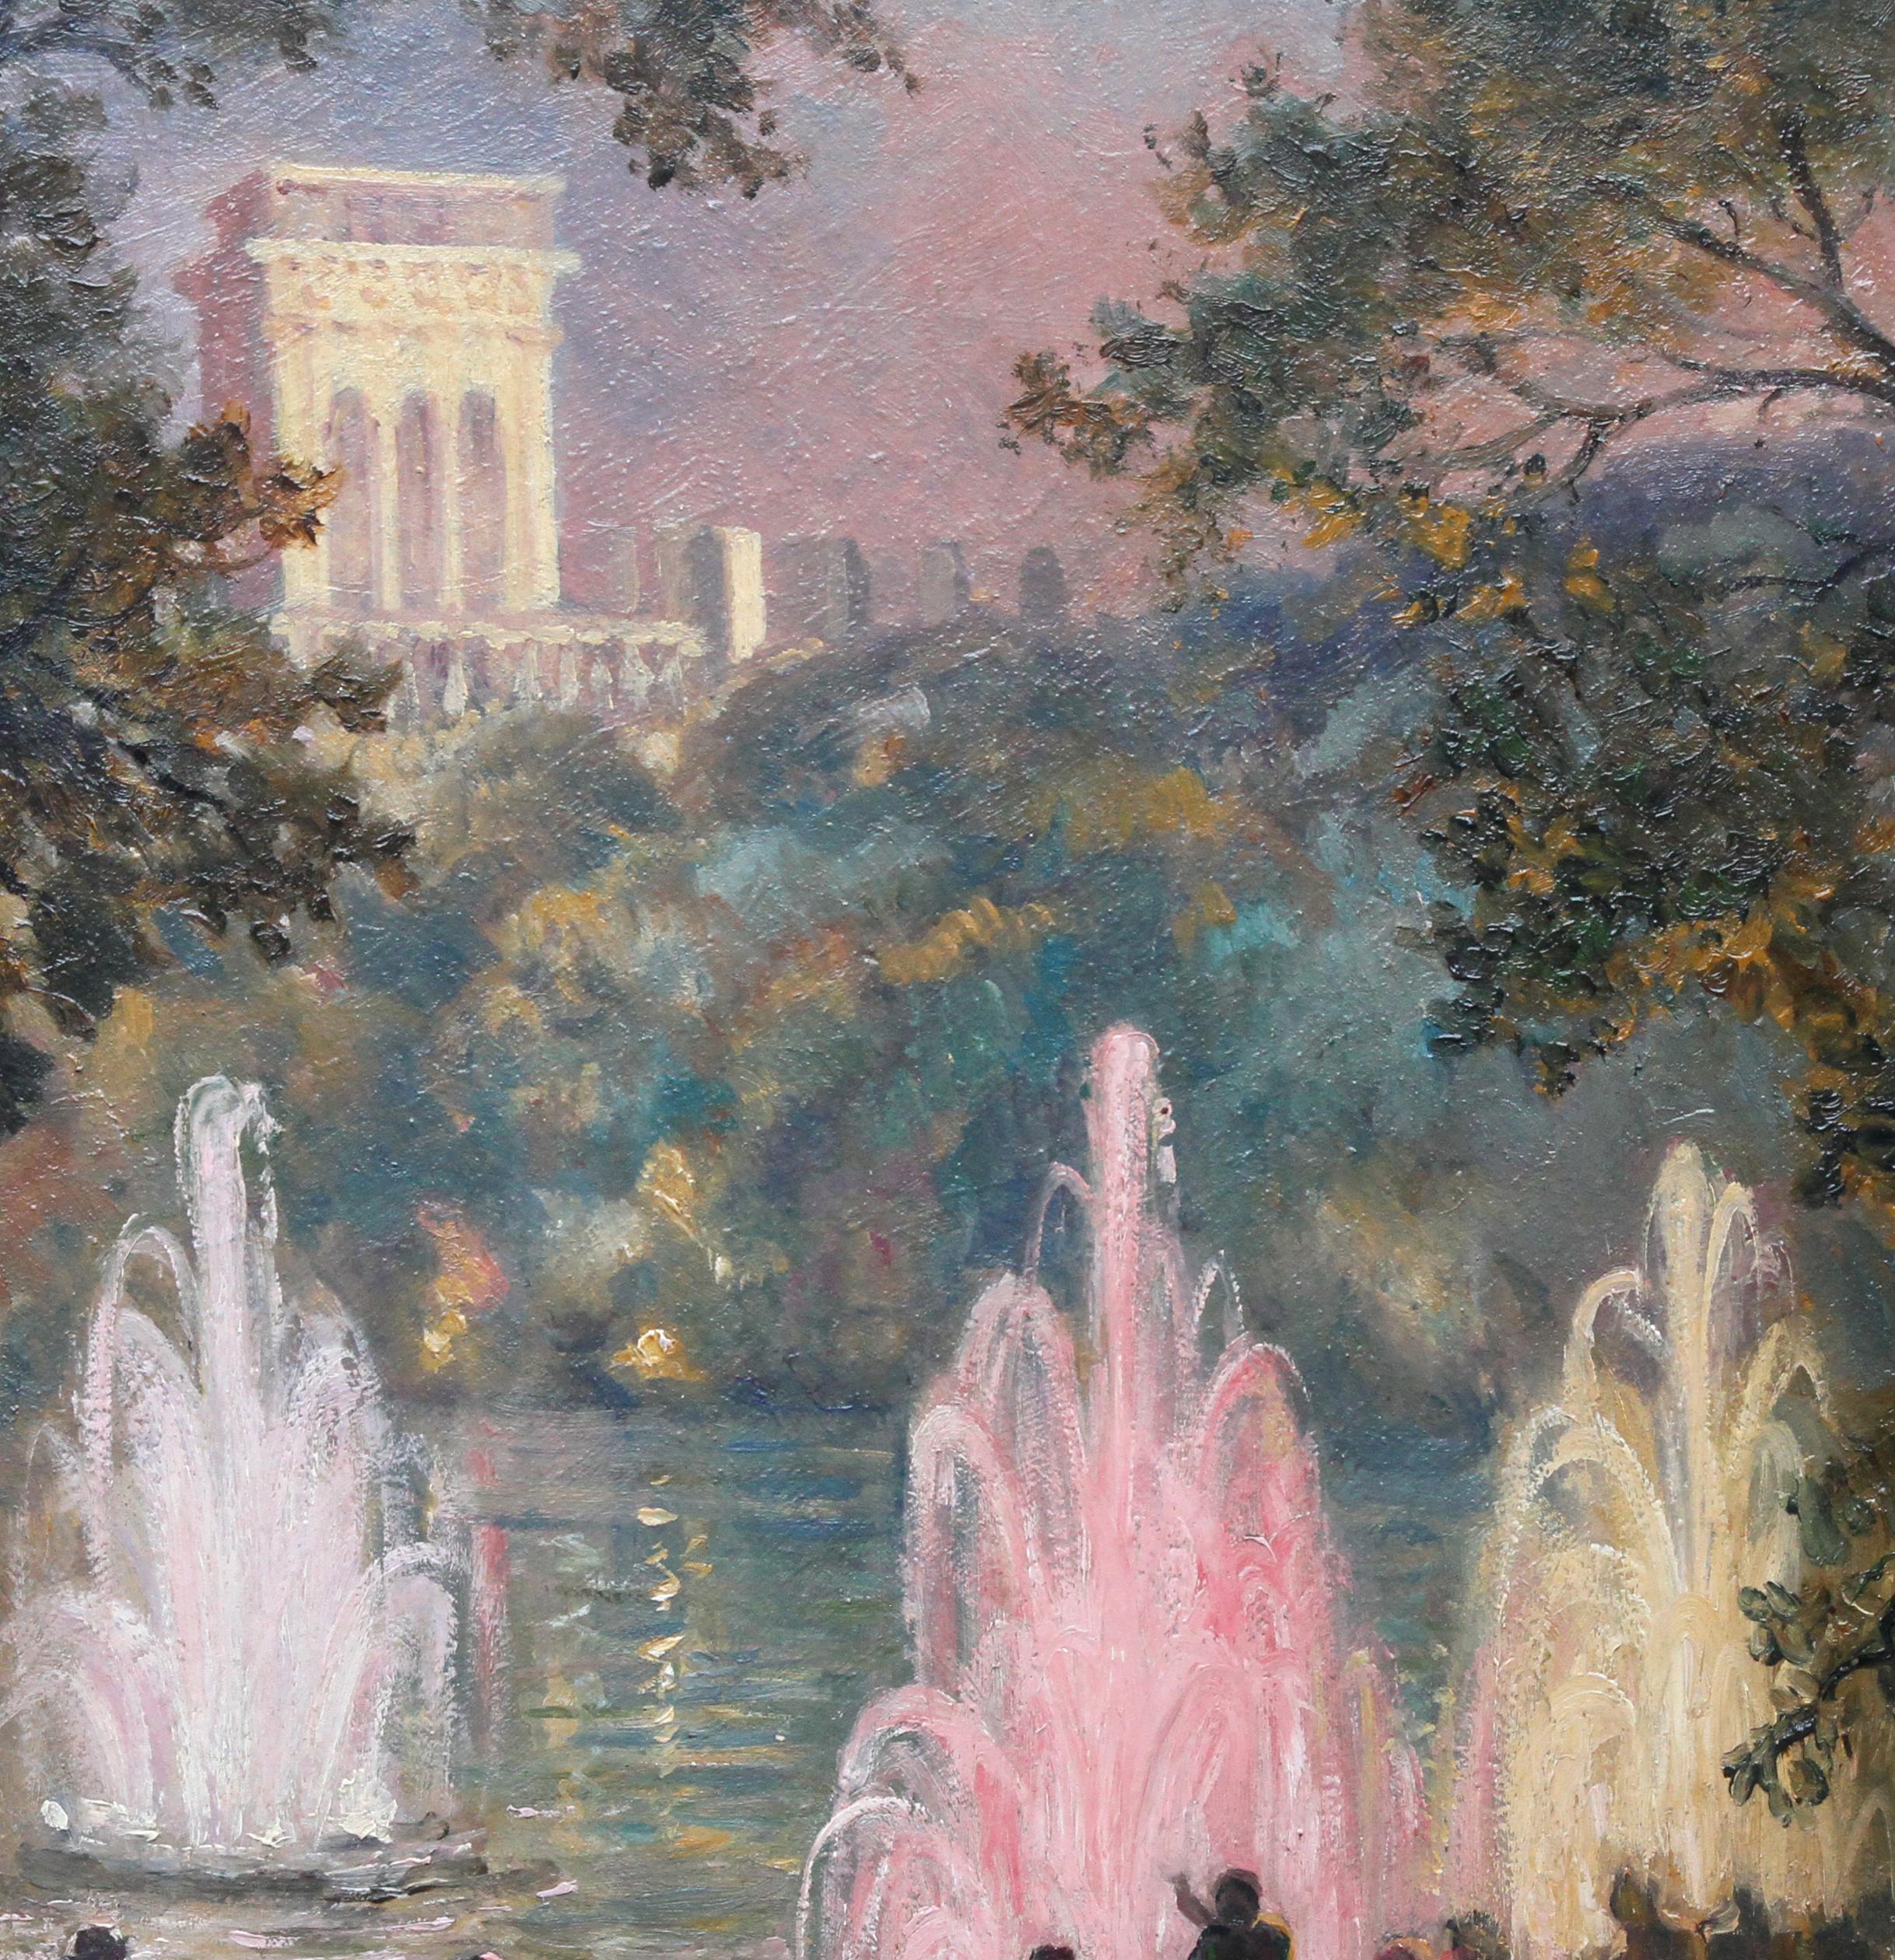 Do you like fountains? Sylvia Gosse certainly did, as the location of this painting is the French town of Pernes Les Fountaines in Provence. The little town has 40 or more fountains, big and small, all serviced by the river Nesque.  Gosse was a